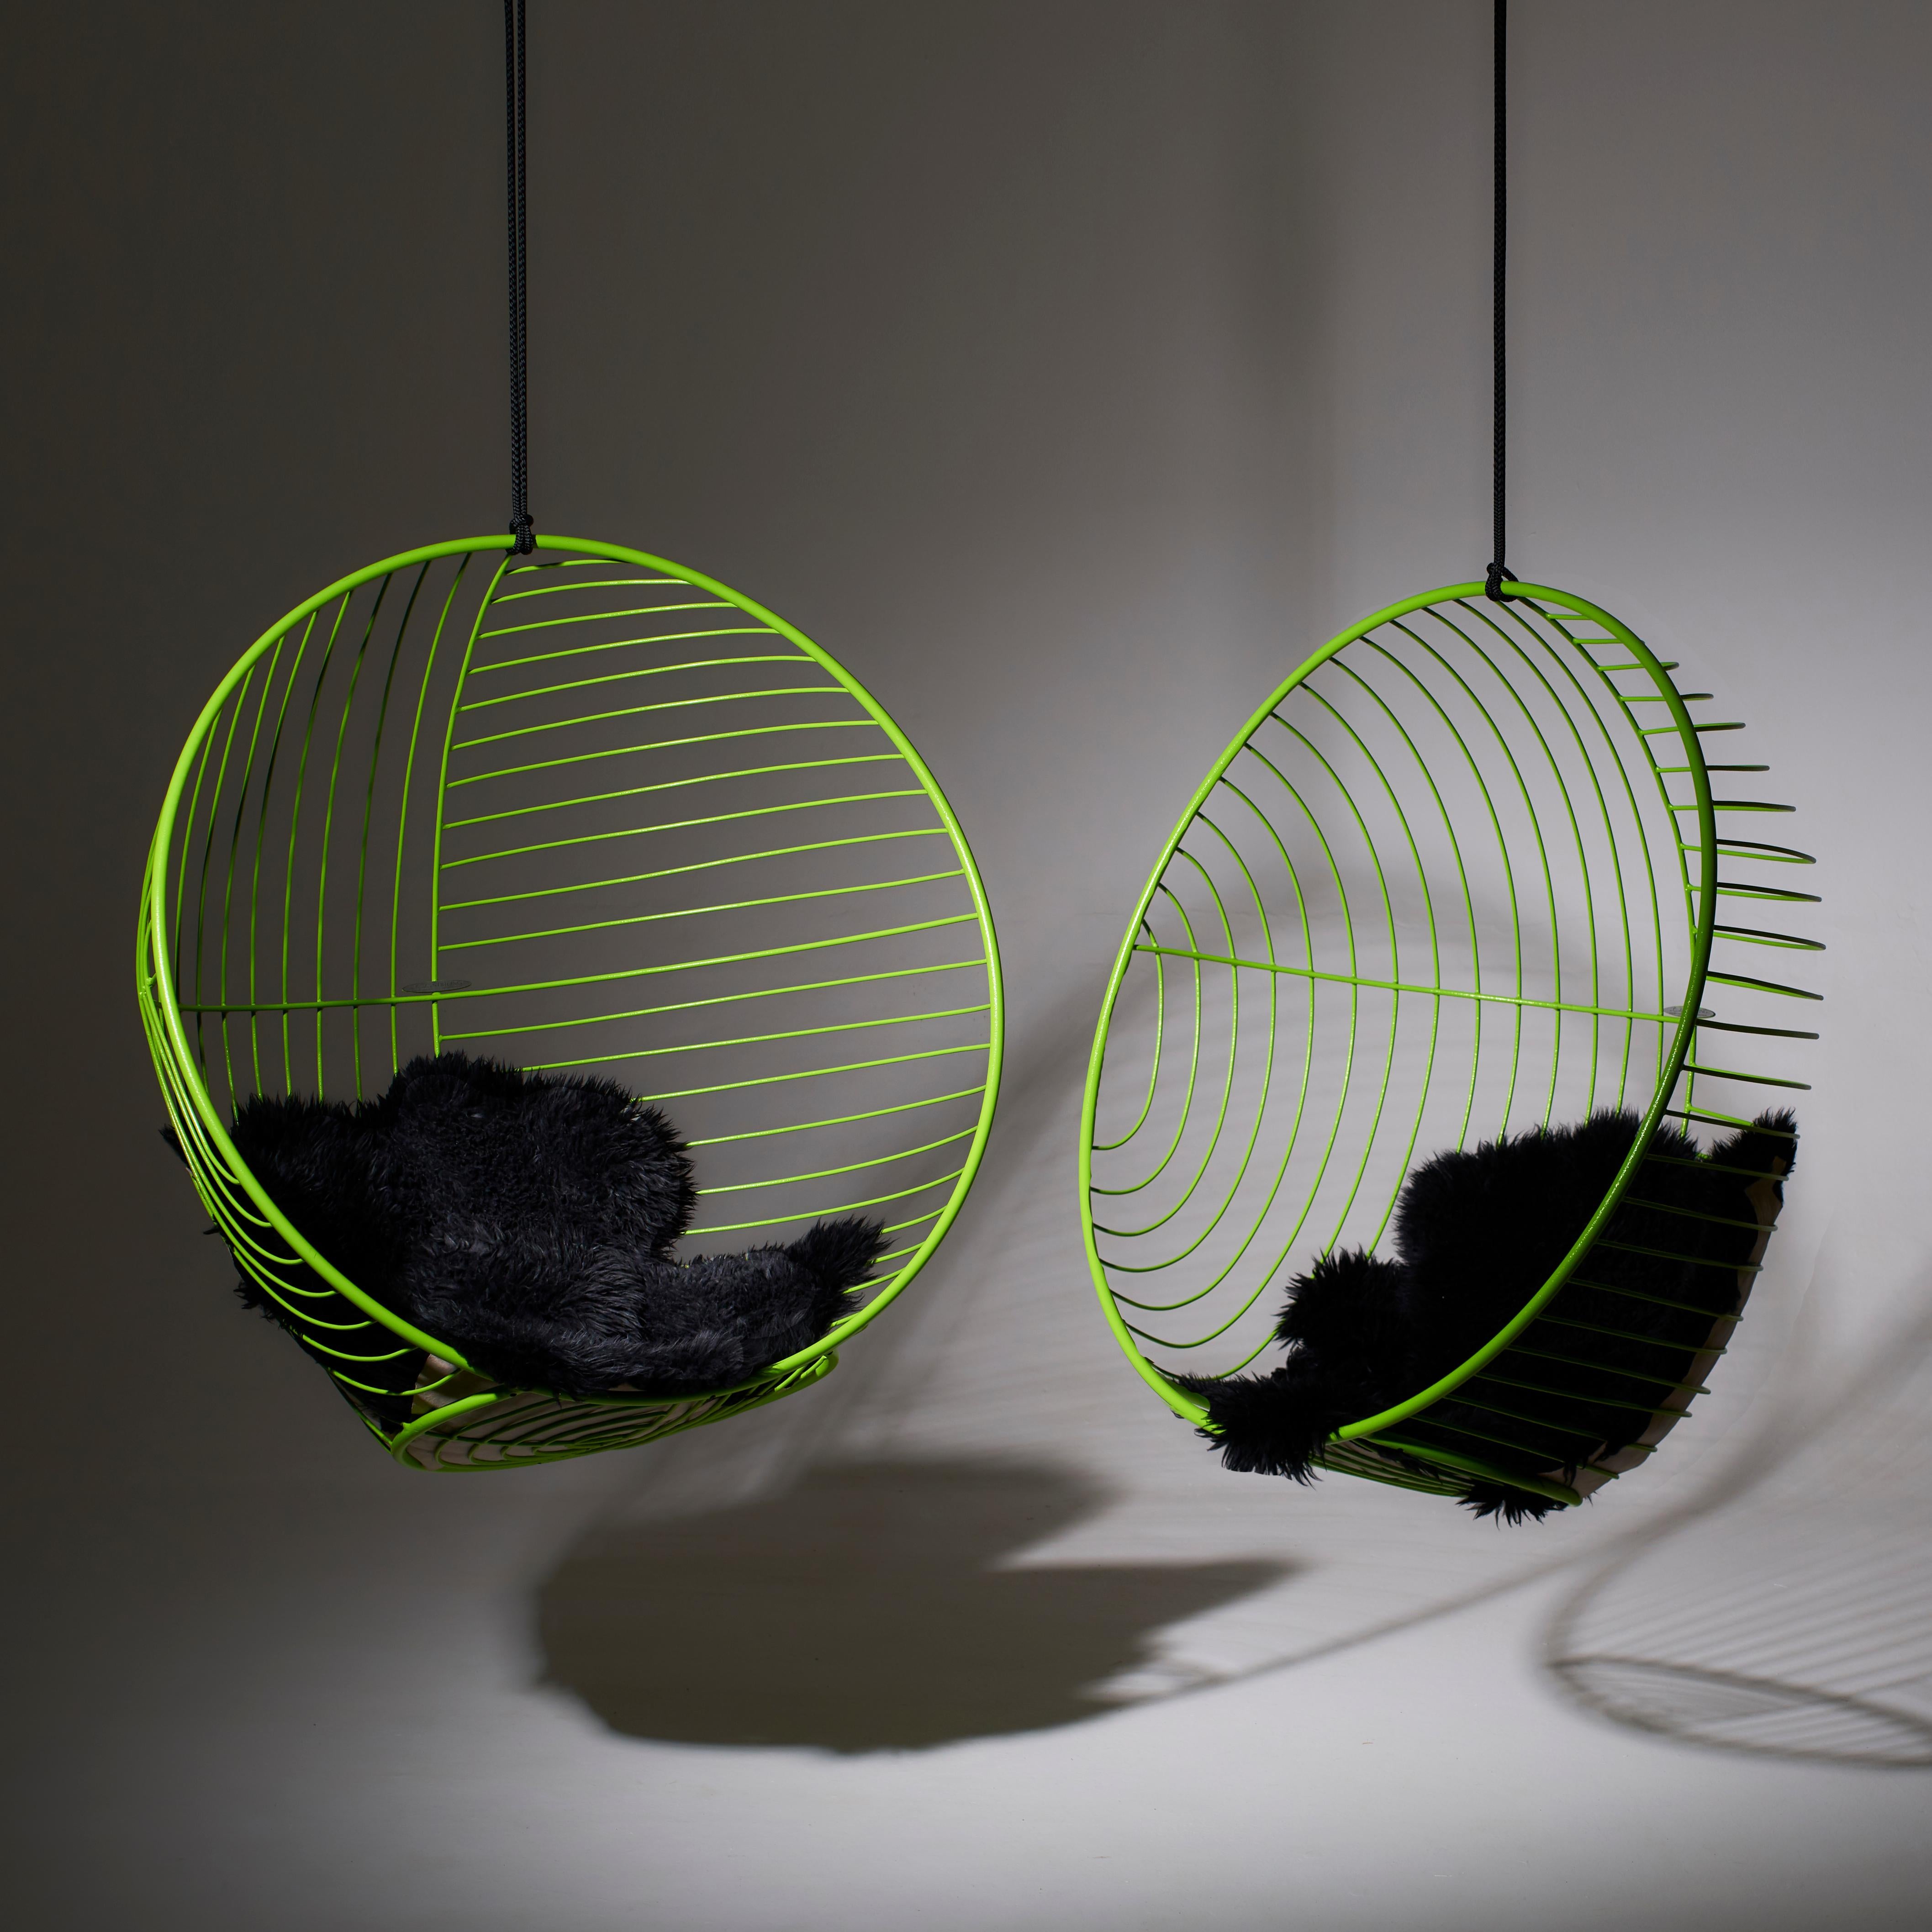 The BUBBLE hanging swing chairs’ round shape creates a cozy feel. The modern patterns are striking in its visual appeal. The chair has been designed to be very comfortable and relaxing. Ideal for ‘chilling’ in, reading a book or just hanging out.